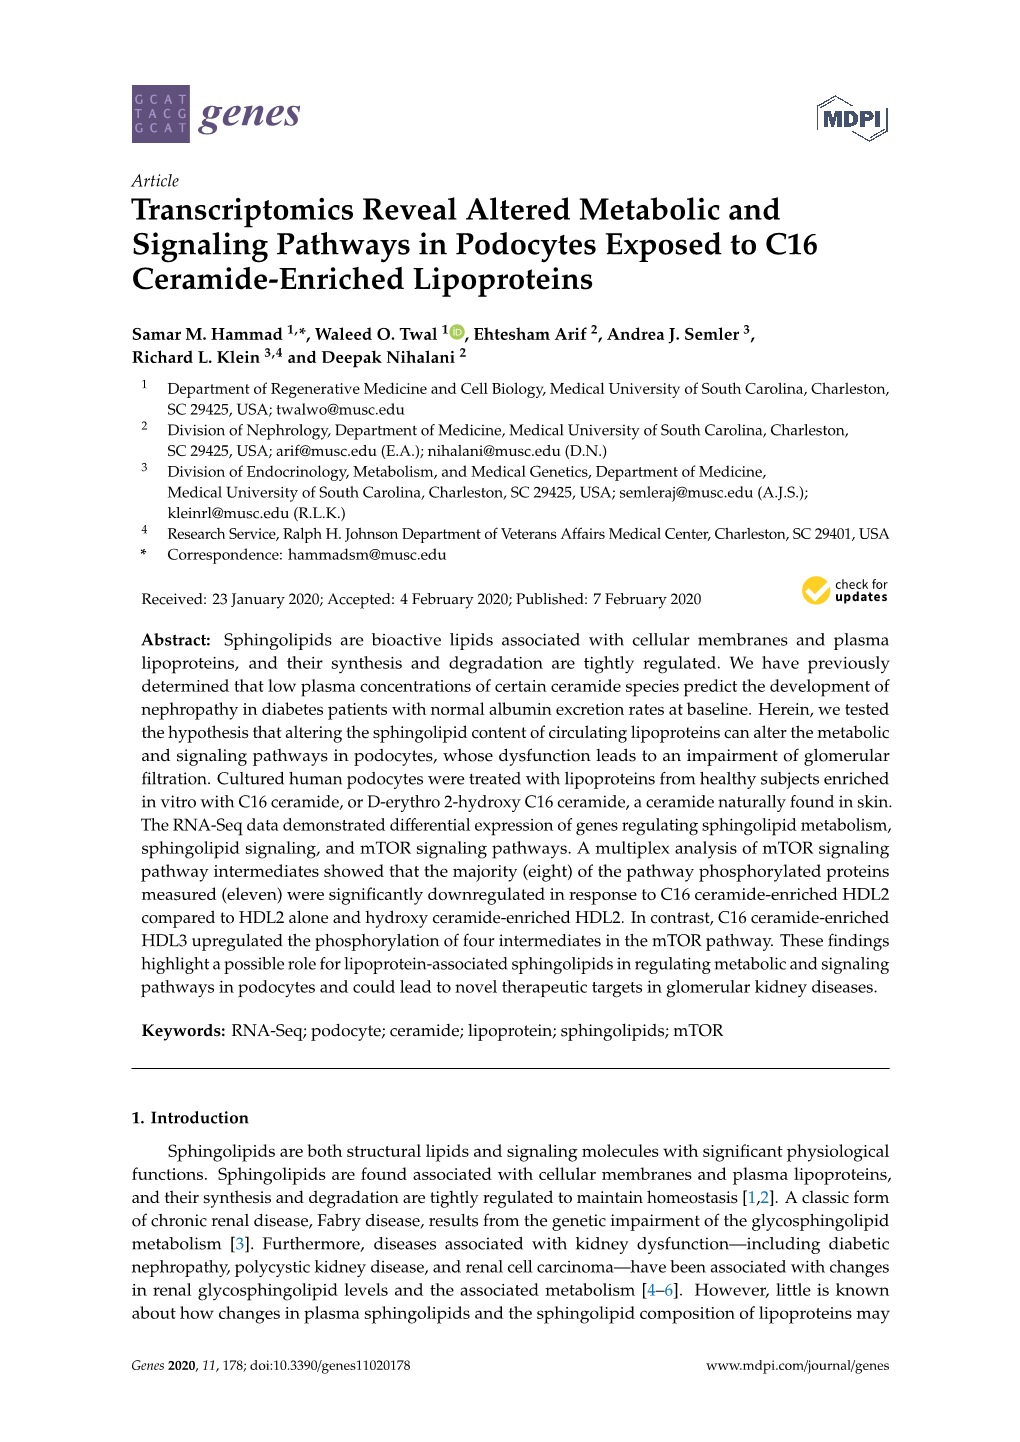 Transcriptomics Reveal Altered Metabolic and Signaling Pathways in Podocytes Exposed to C16 Ceramide-Enriched Lipoproteins